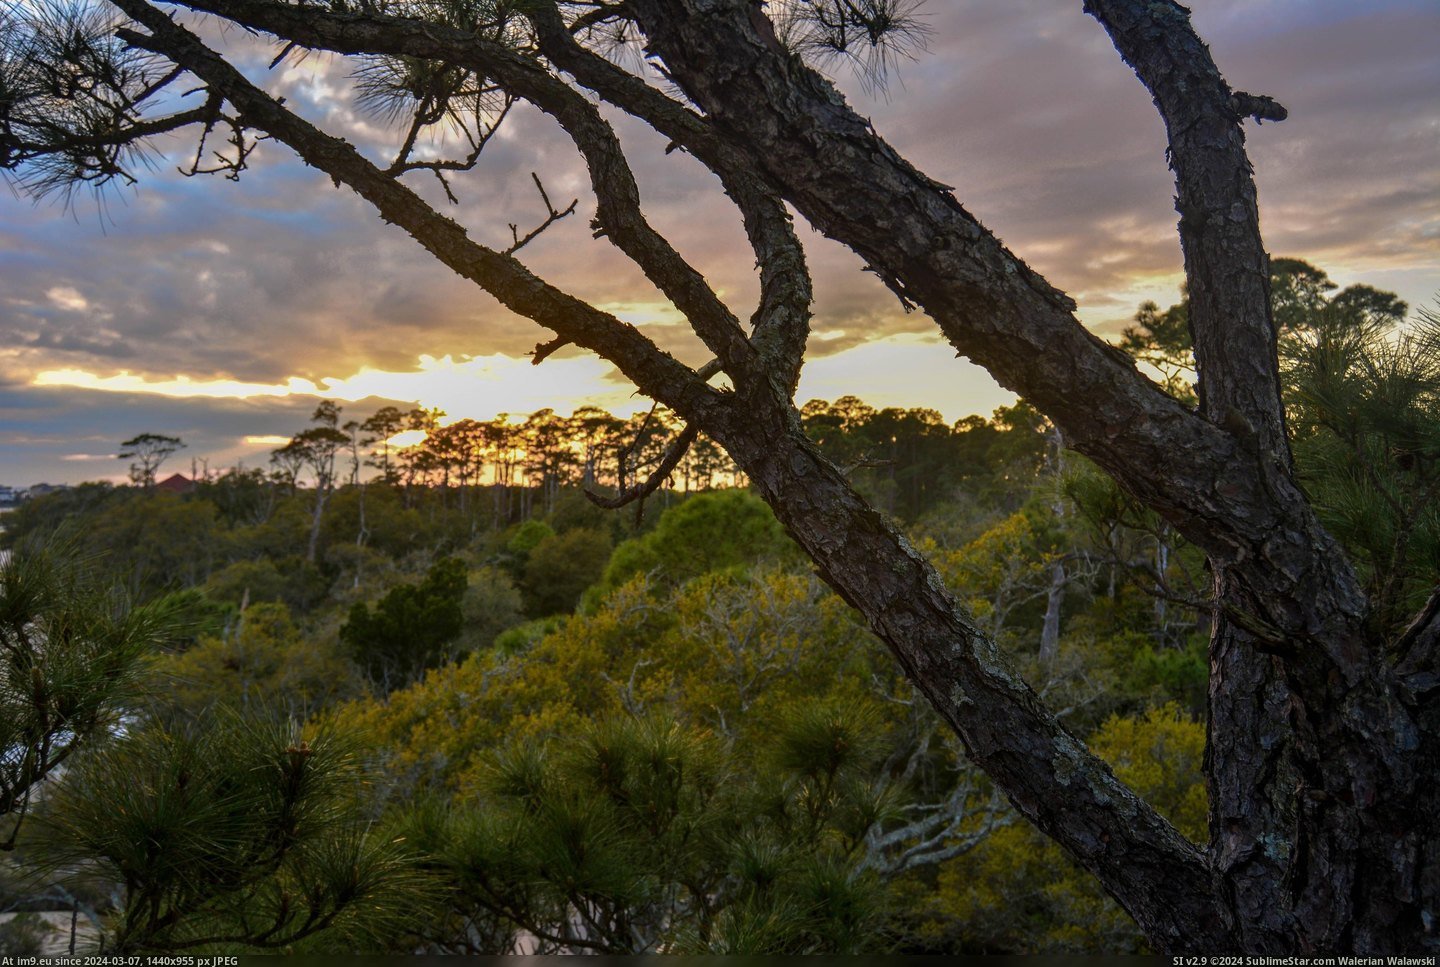 #Feet #Sunset #6000x4000 #Overlooking #Pensacola #Trees #Florida [Earthporn] Around 30 feet up in the trees, overlooking the sunset in Pensacola, Florida. [6000x4000] Pic. (Bild von album My r/EARTHPORN favs))